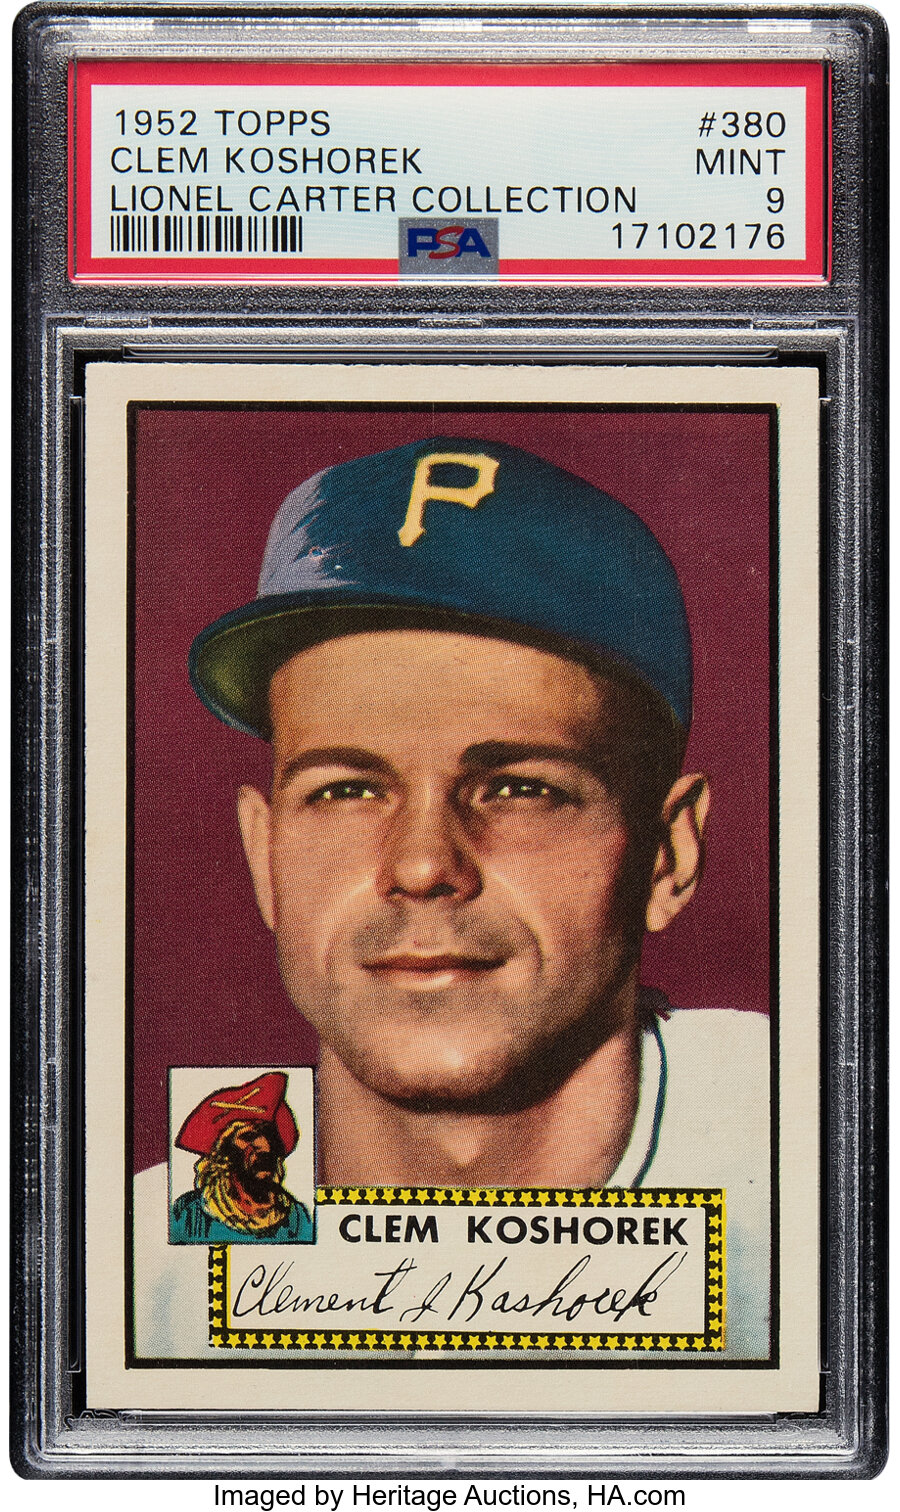 1952 Topps Clem Koshorek Rookie #380 PSA Mint 9 - Pop Five, None Superior! From the Lionel Carter Collection